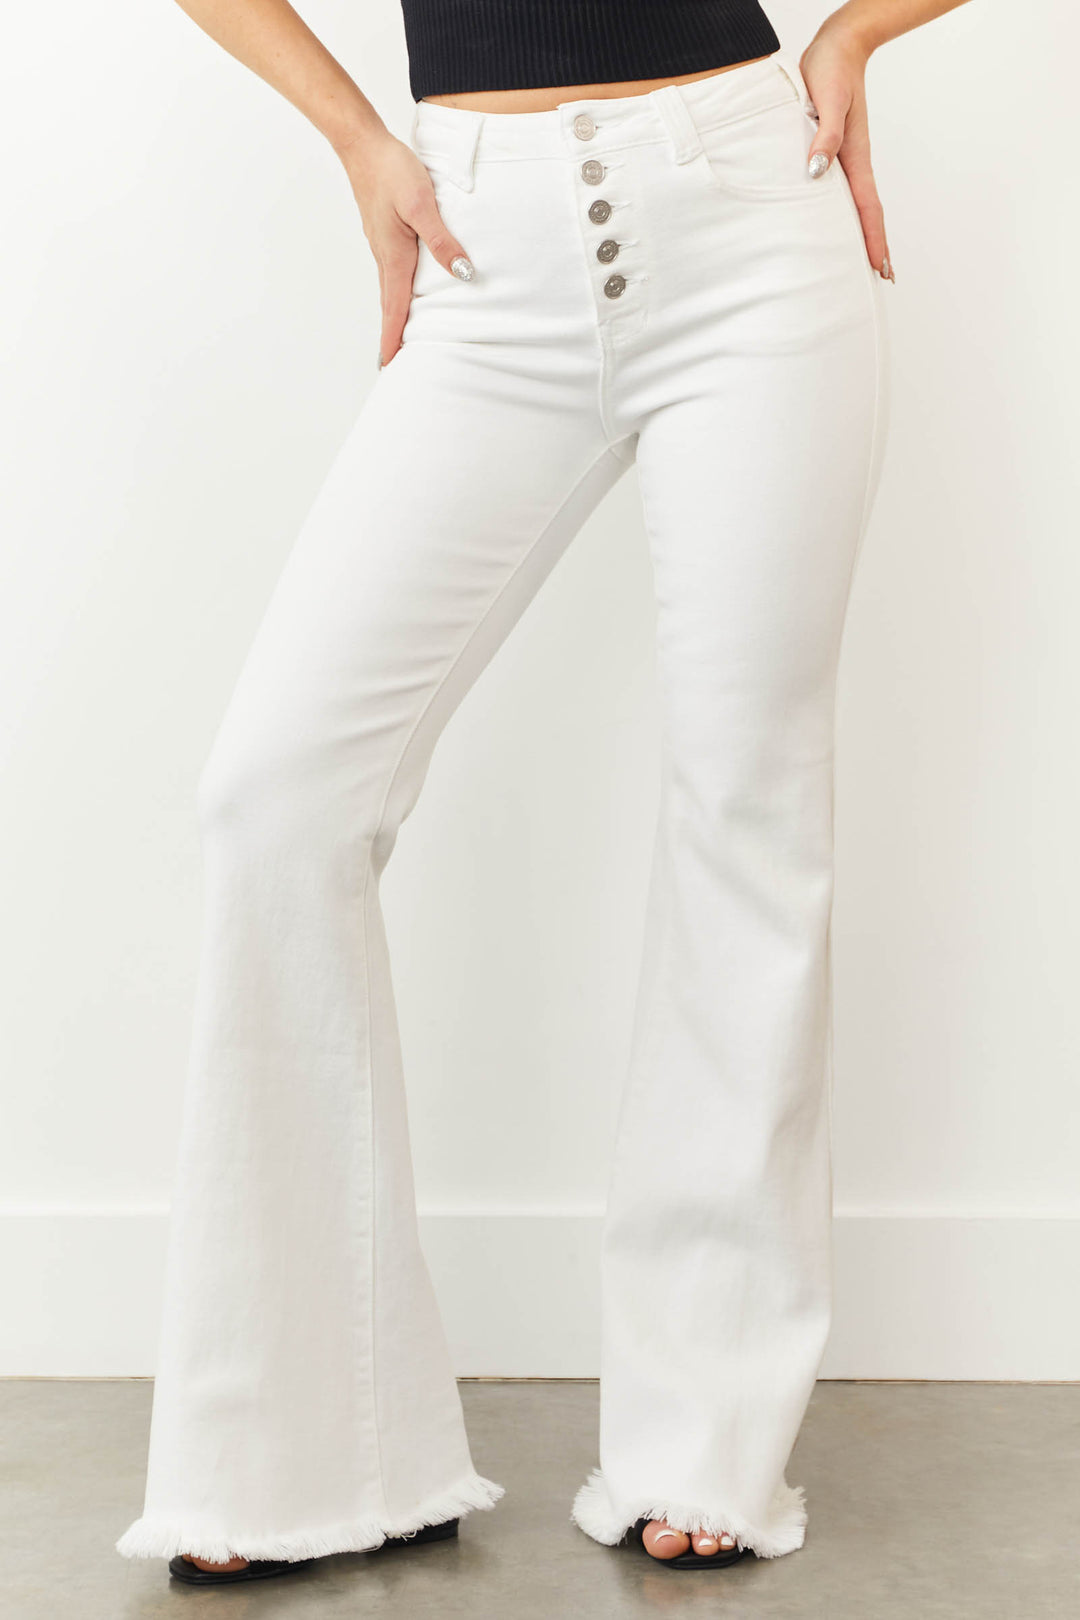 KanCan Off White Button Fly High Rise Flare Jean & Lime Lush